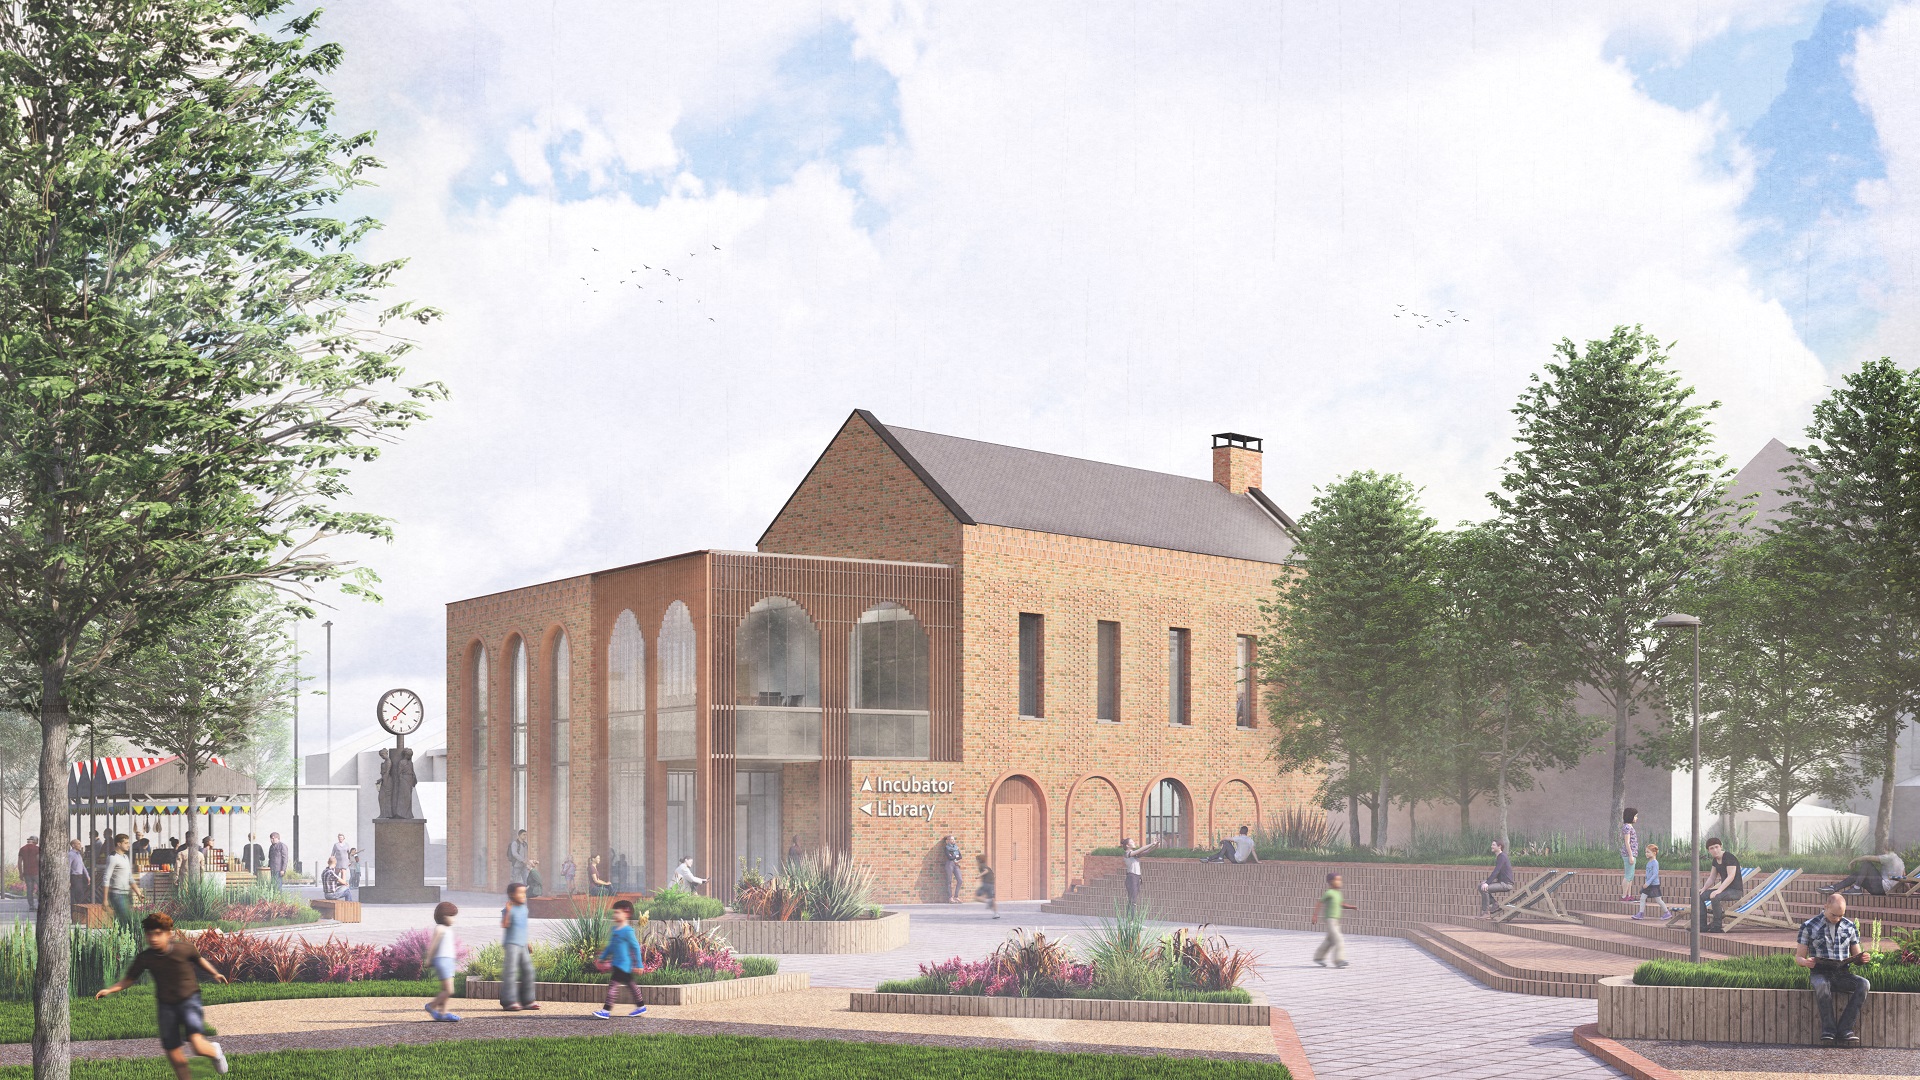 A promotional image for the Staveley regeneration scheme